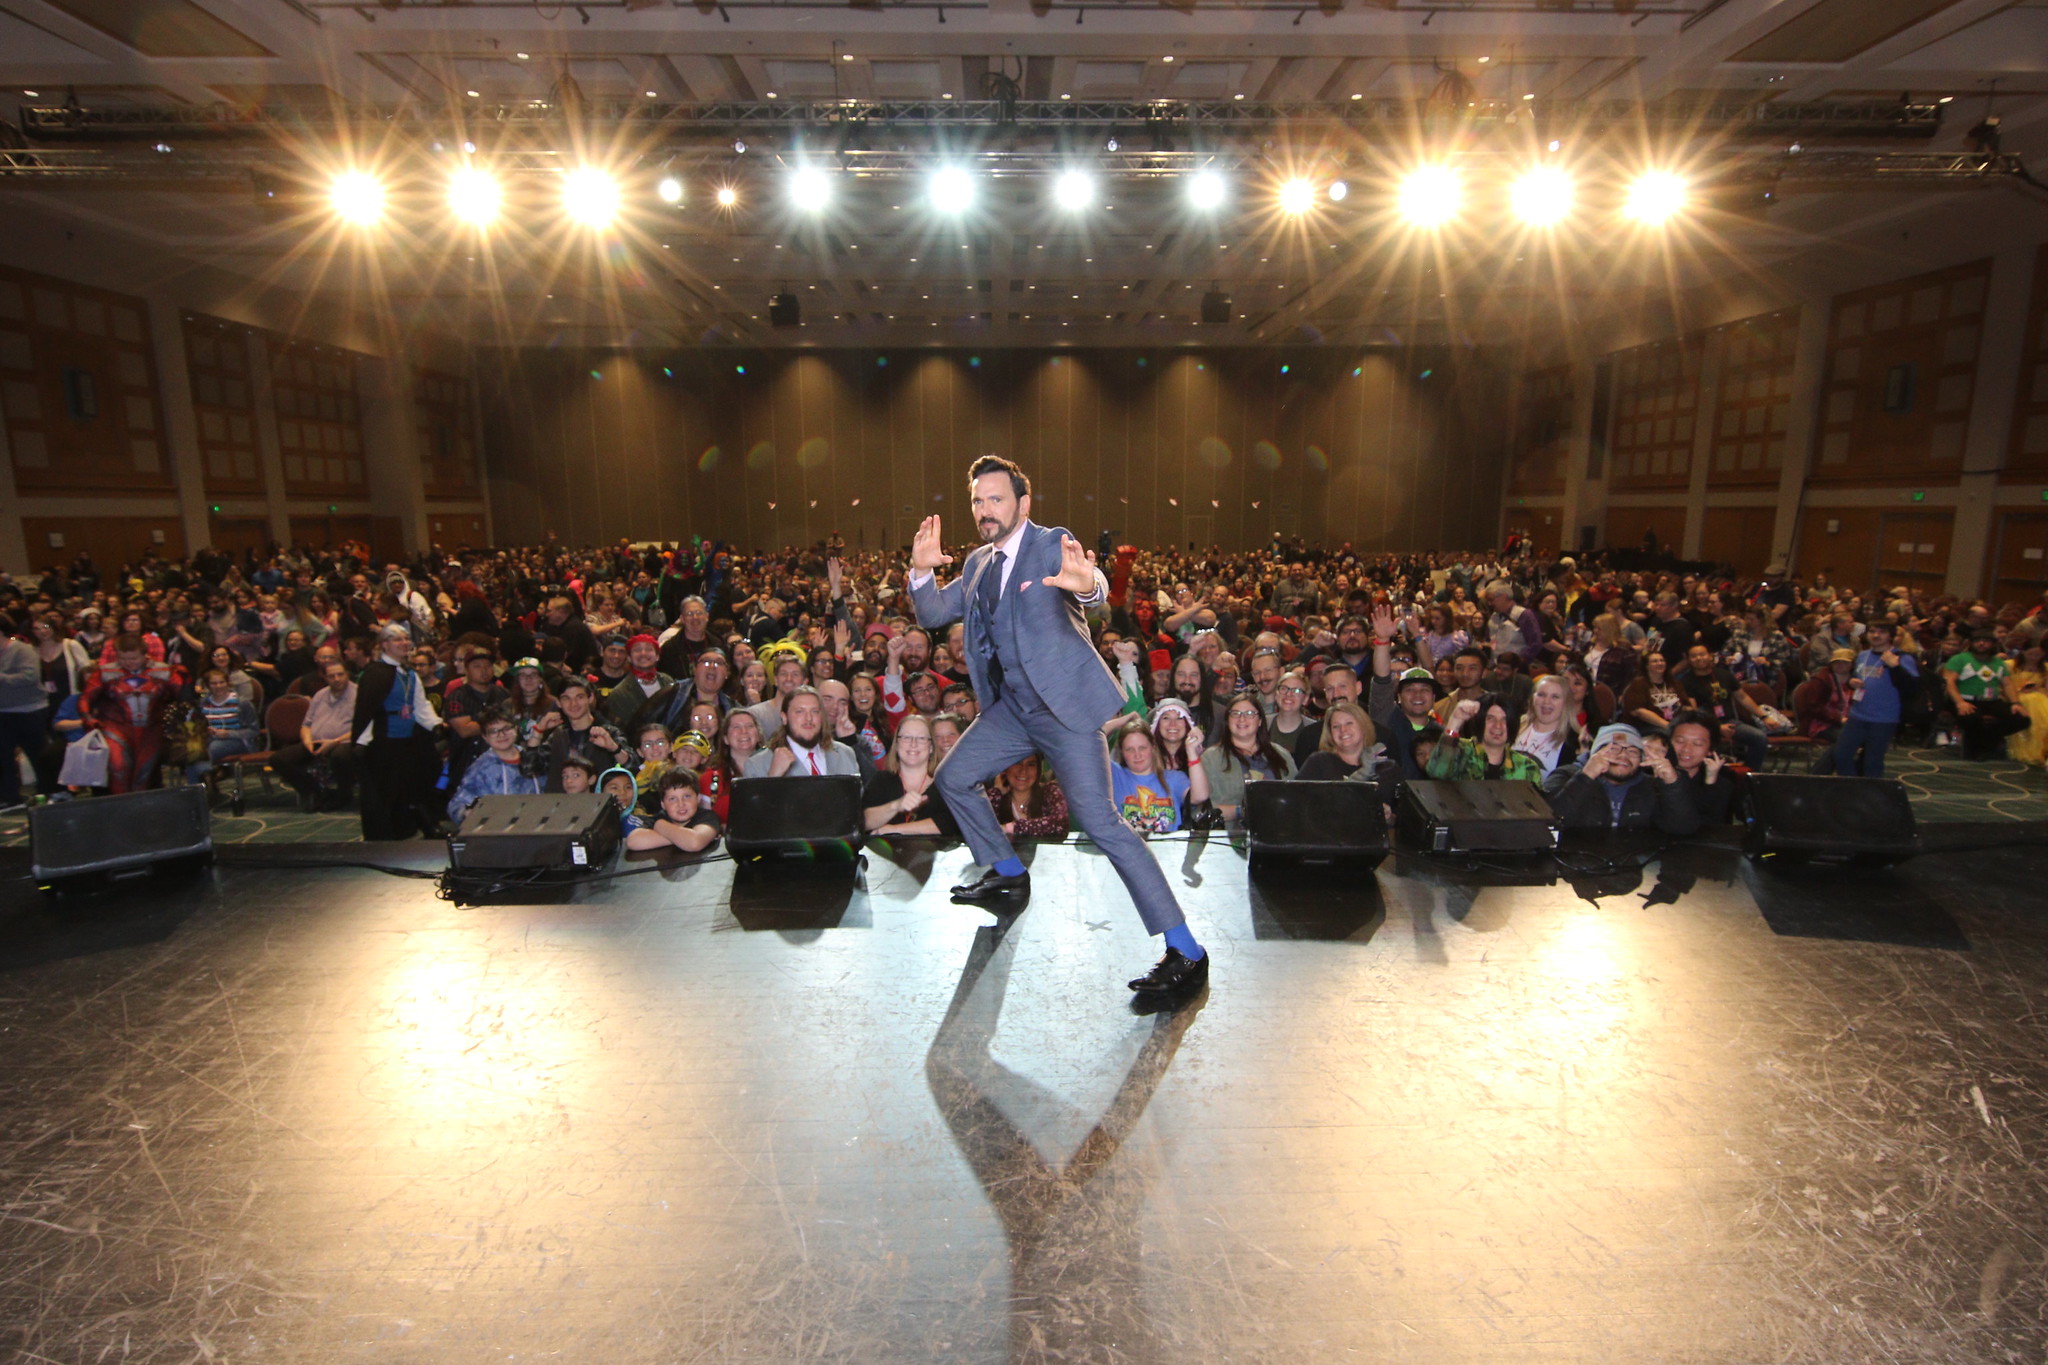 Dressed in a suit, Jason David Frank strikes a dramatic pose on stage, hands held in martial-arts chopping poses, as a crowd looks on with excitement behind him, smiling for the camera.